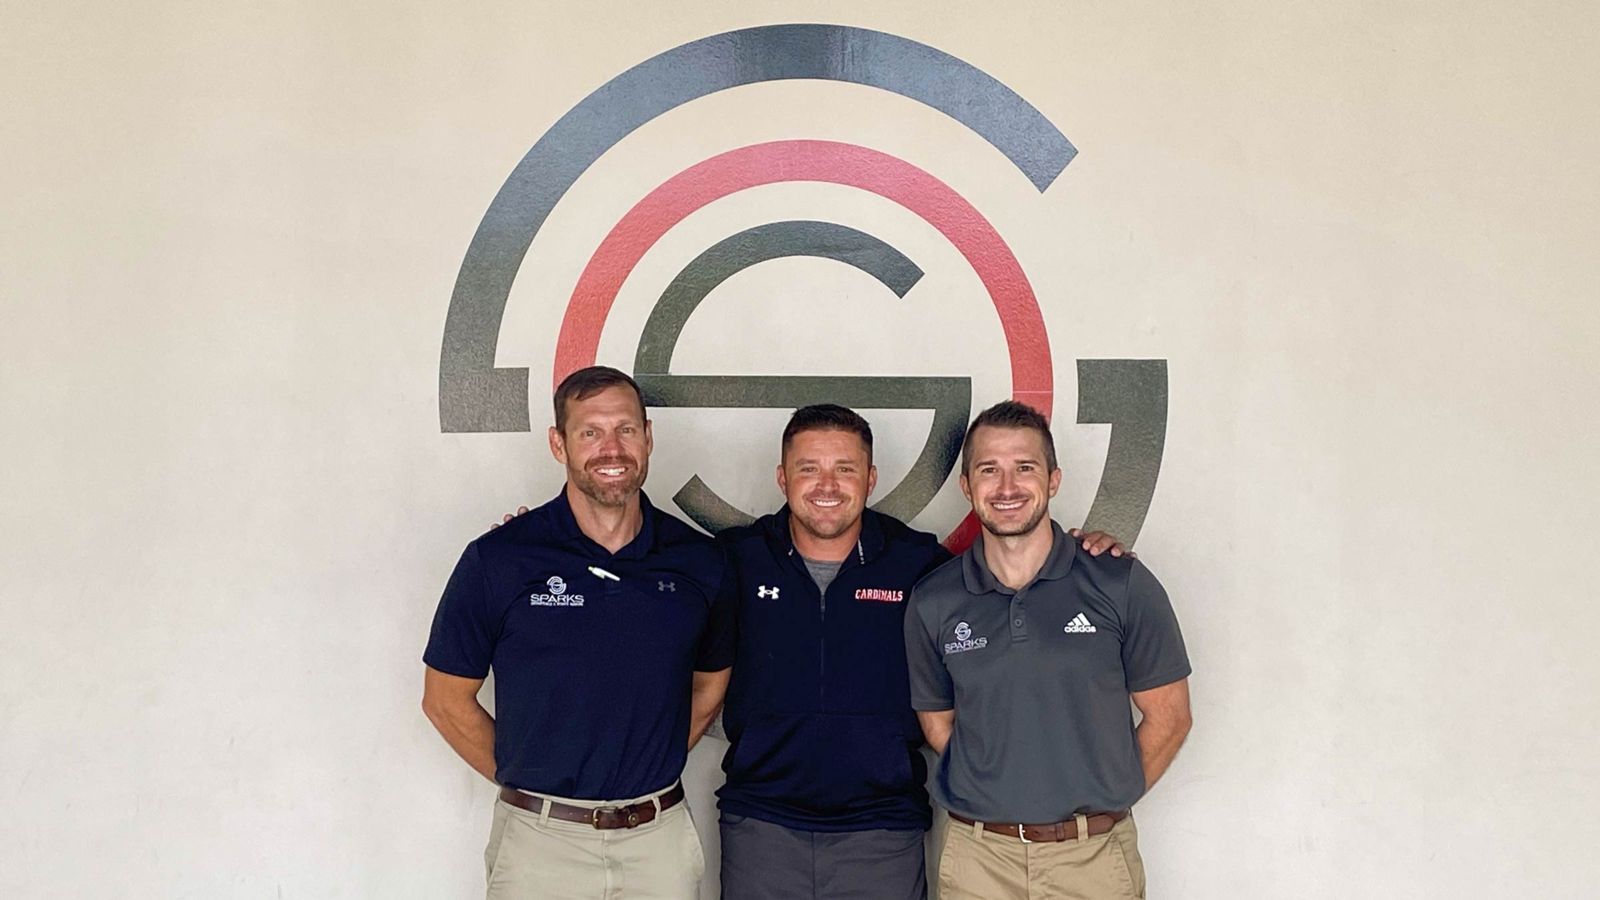 Pictured are, from left, Dr. Dierick Sparks, orthopedic surgeon; Blake Lewis, Gadsden State athletic director; and Dr. Corey Fuller, clinical director.